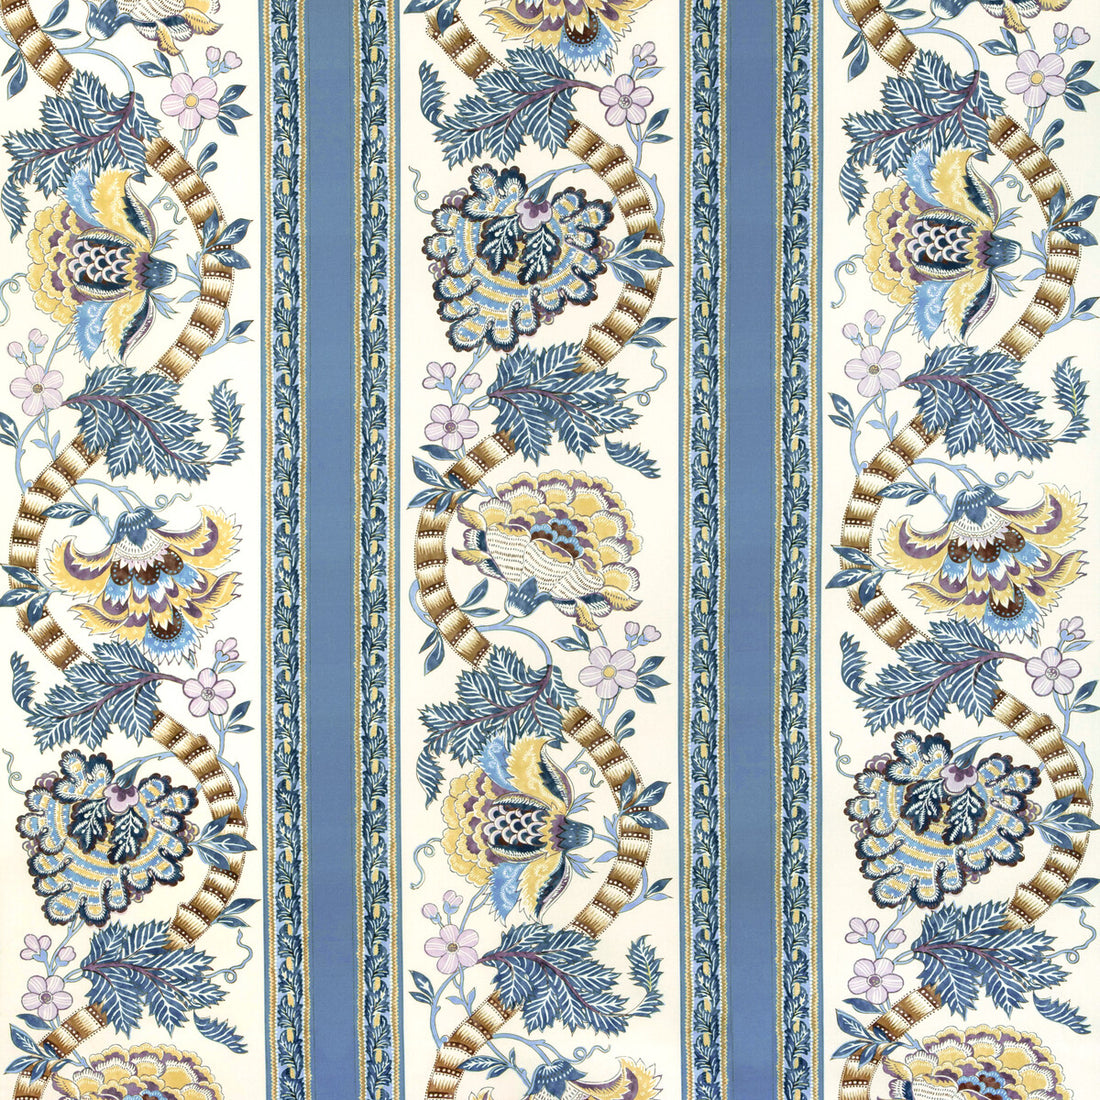 Lauris Print fabric in blue/gold color - pattern 8023106.54.0 - by Brunschwig &amp; Fils in the Cadenet collection